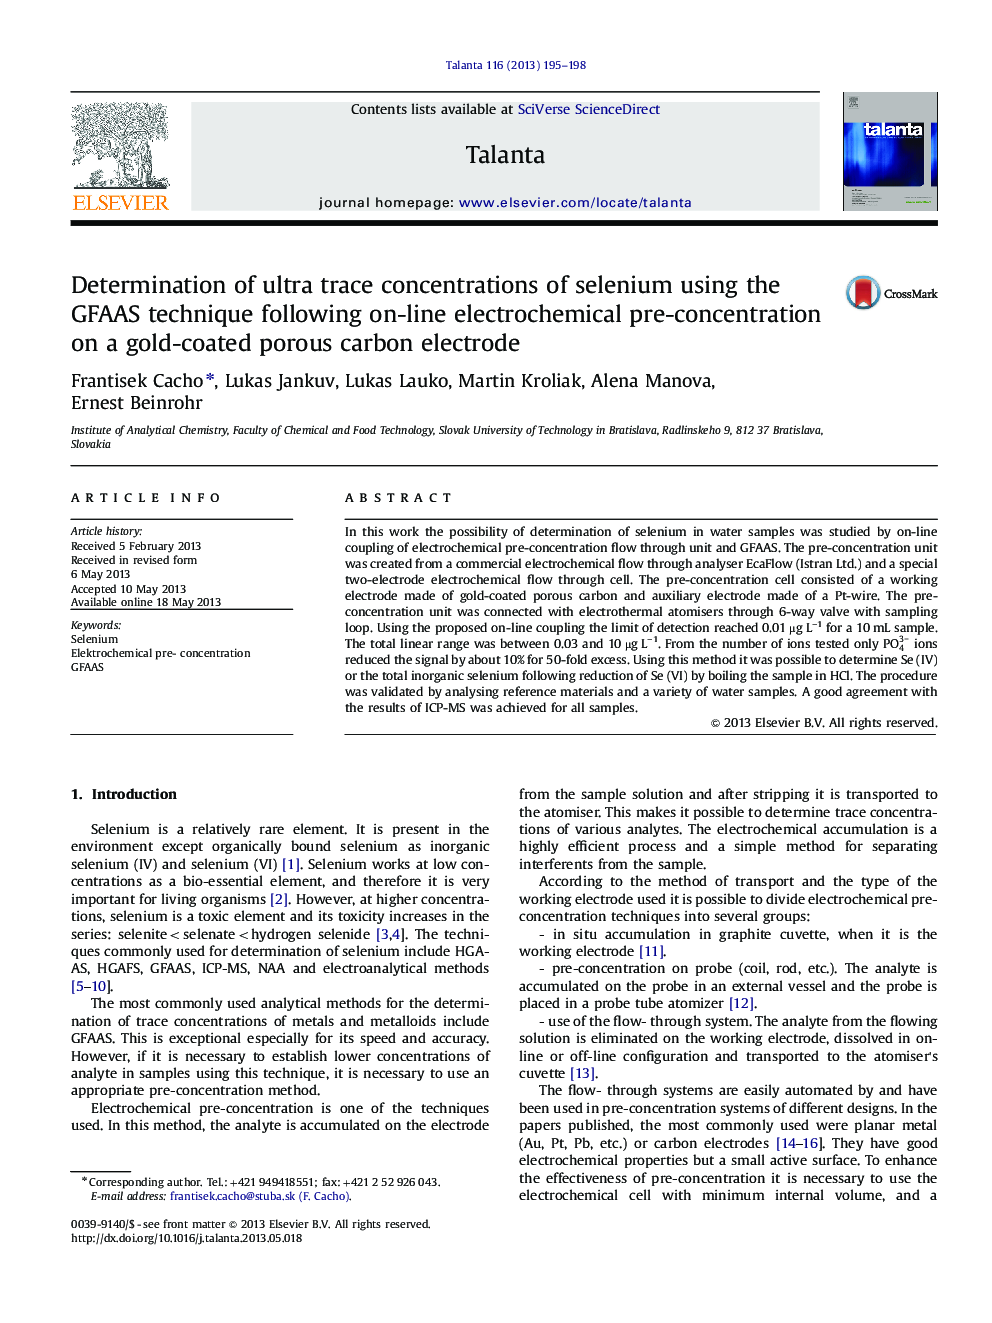 Determination of ultra trace concentrations of selenium using the GFAAS technique following on-line electrochemical pre-concentration on a gold-coated porous carbon electrode